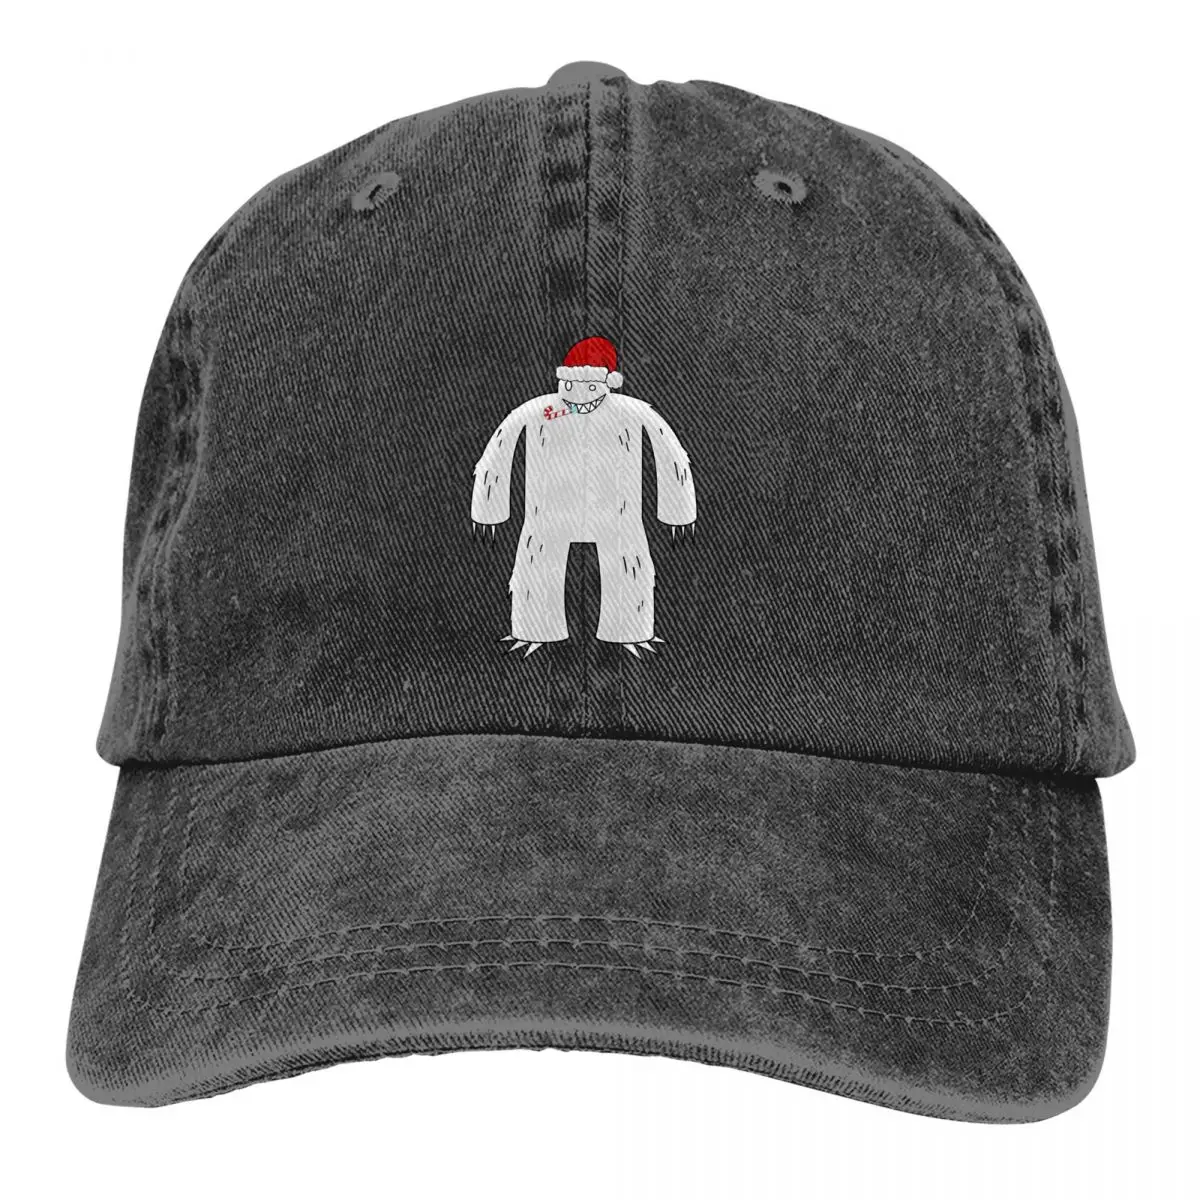 Peaked Women's Cap Yeti Claus Long Sleeve Personalized Visor Protection Hats